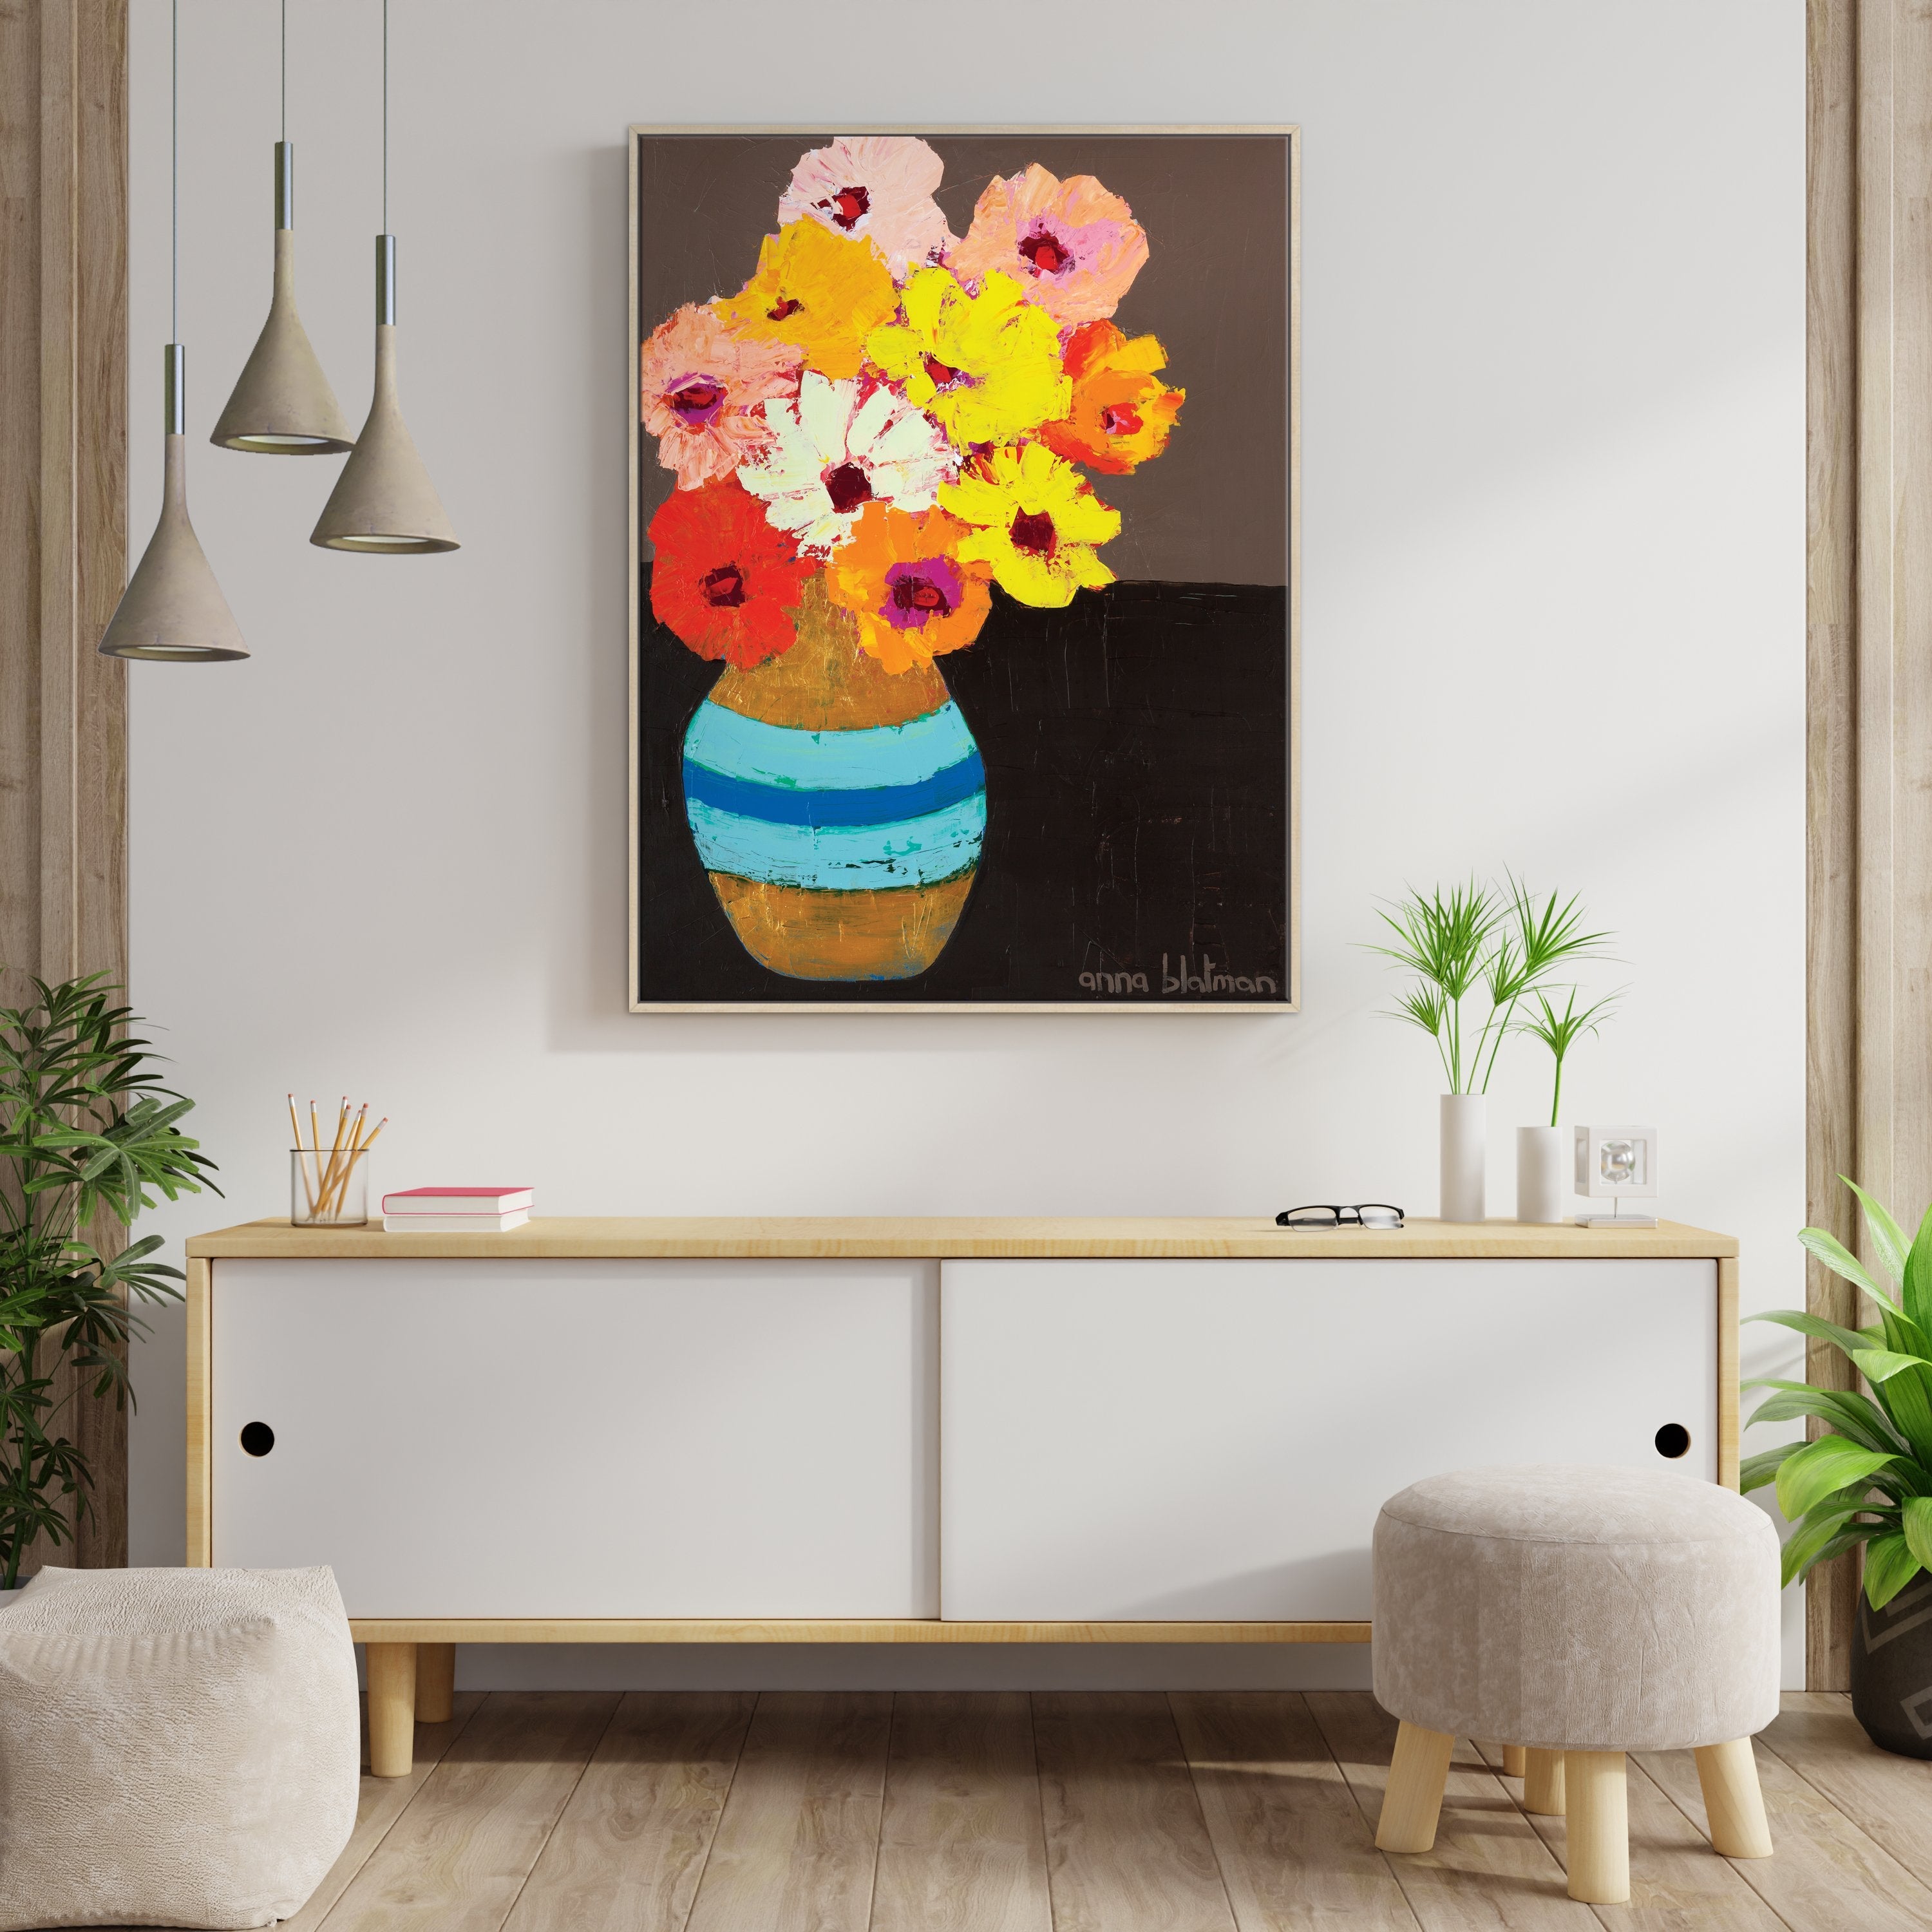 Petra - Gallery Wrapped Canvas